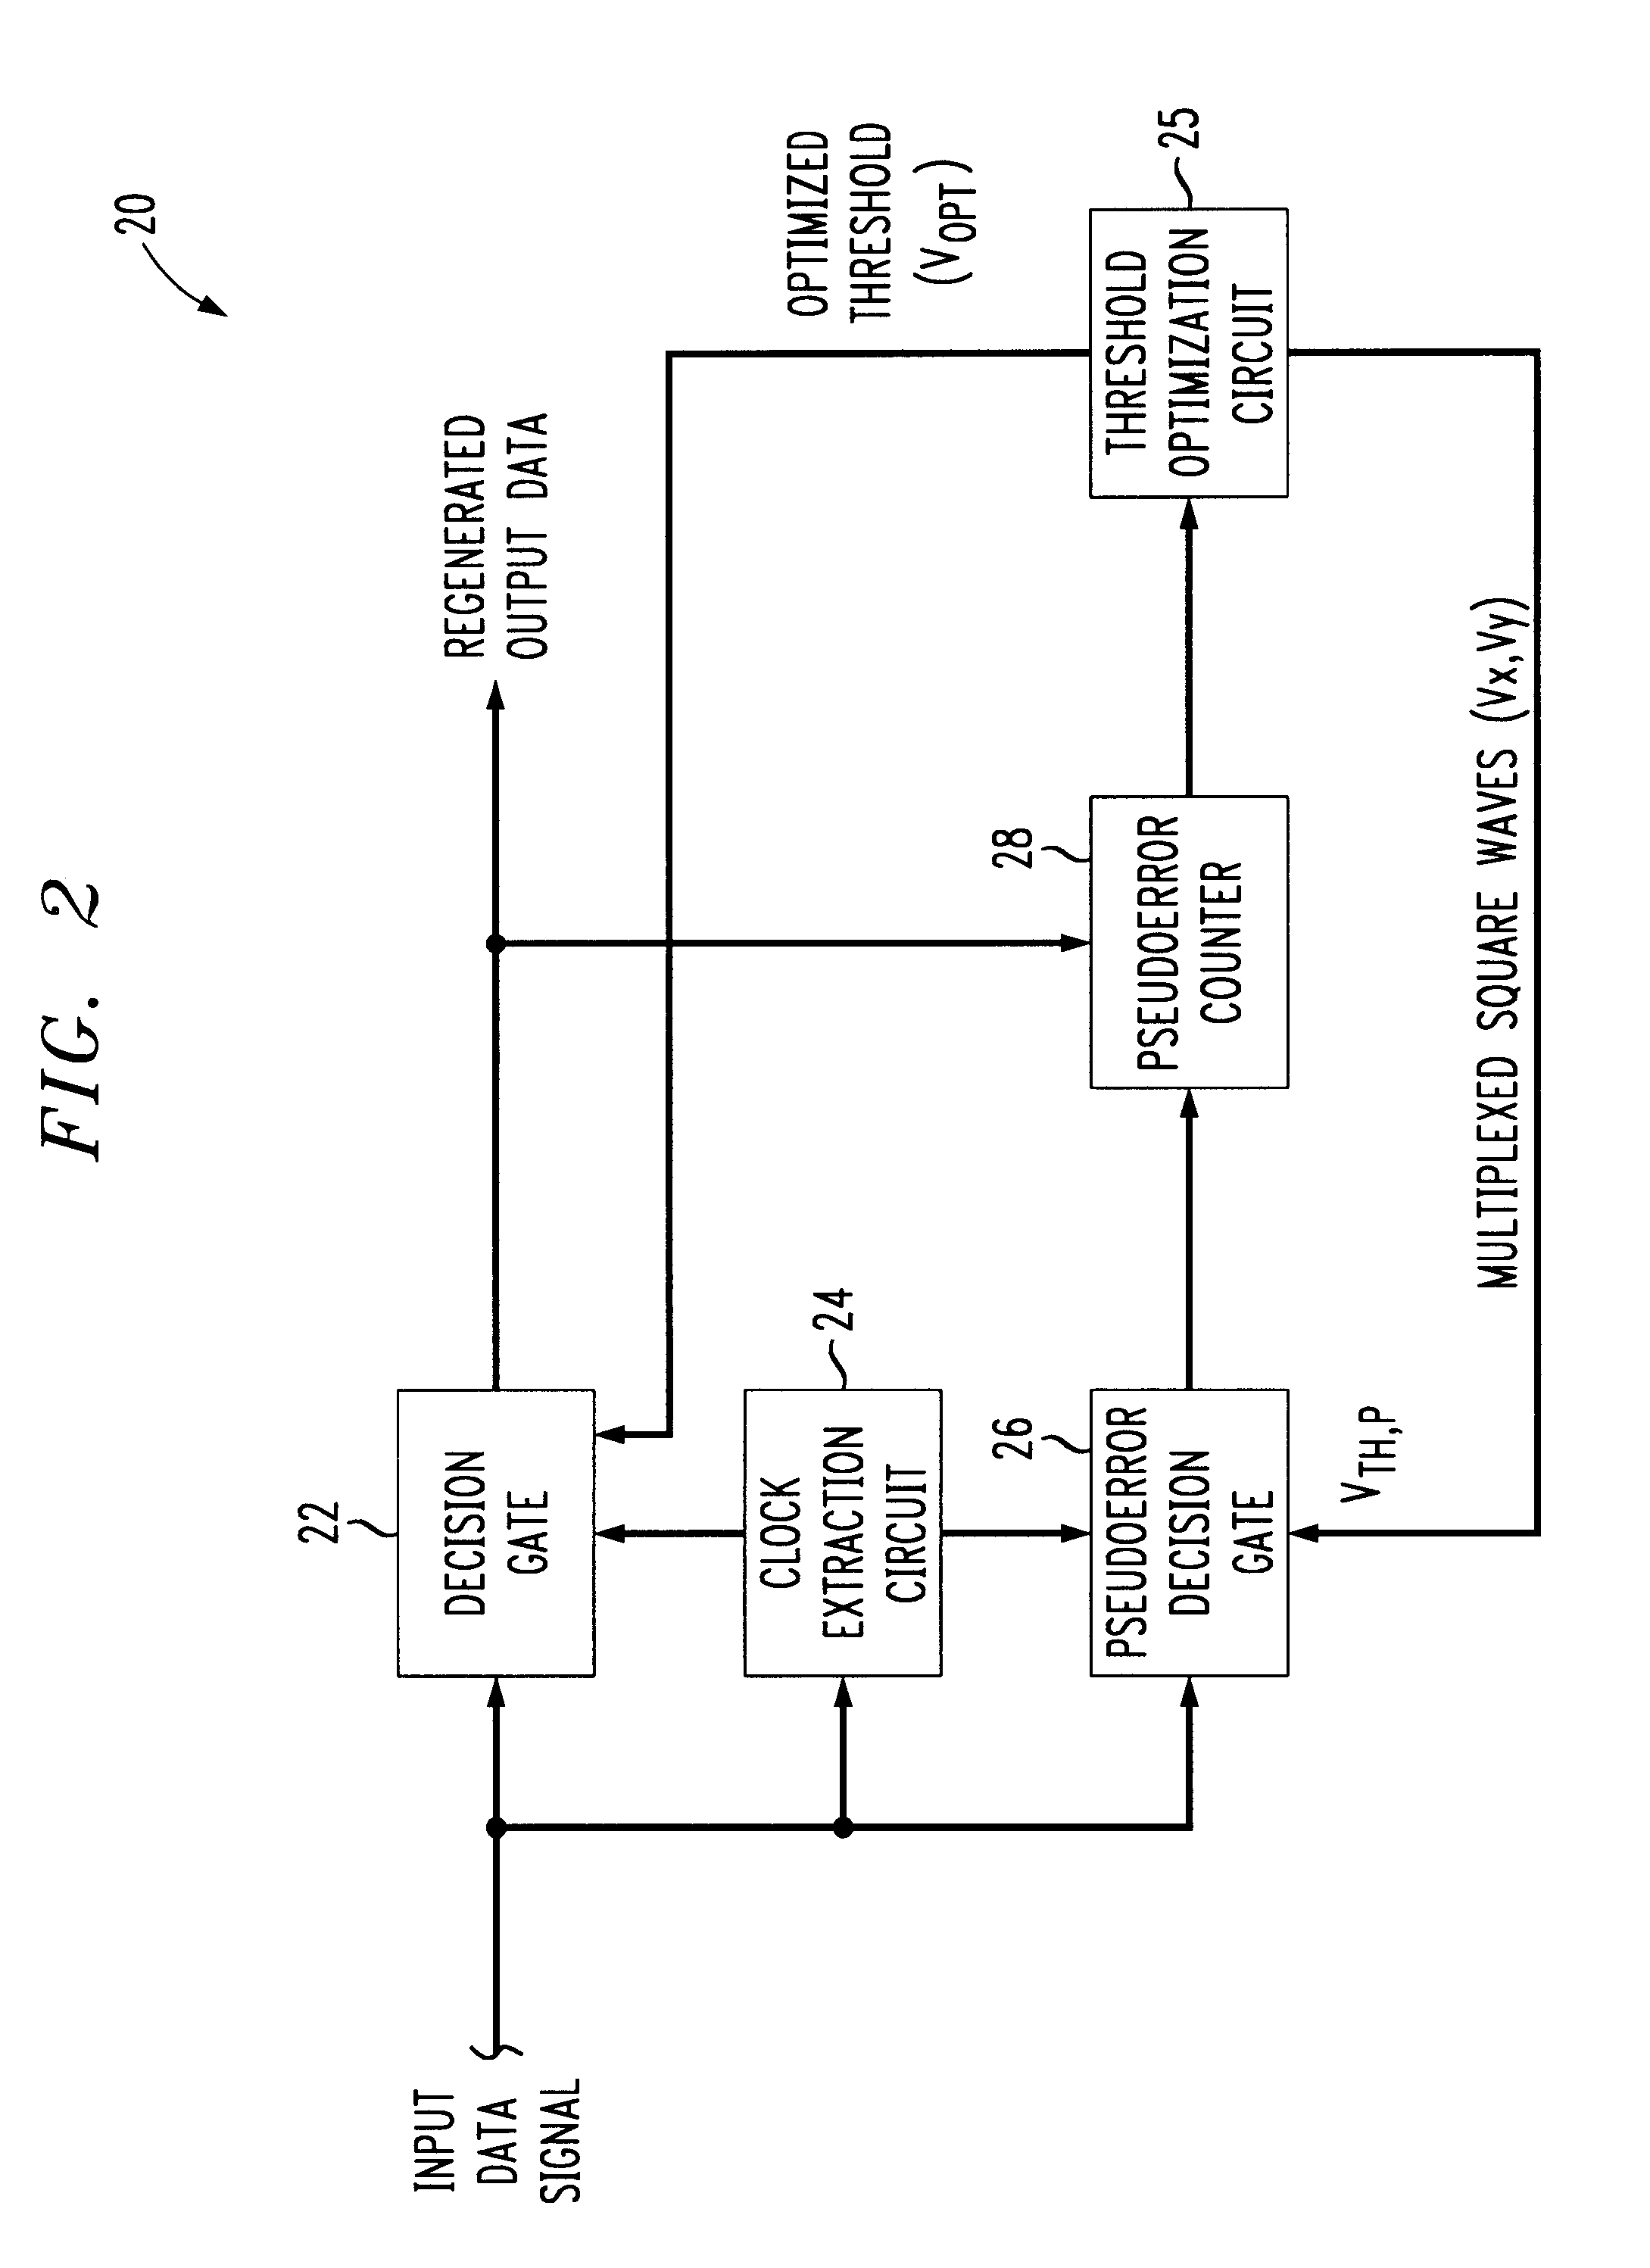 Adaptive threshold control circuit and method within high speed receivers